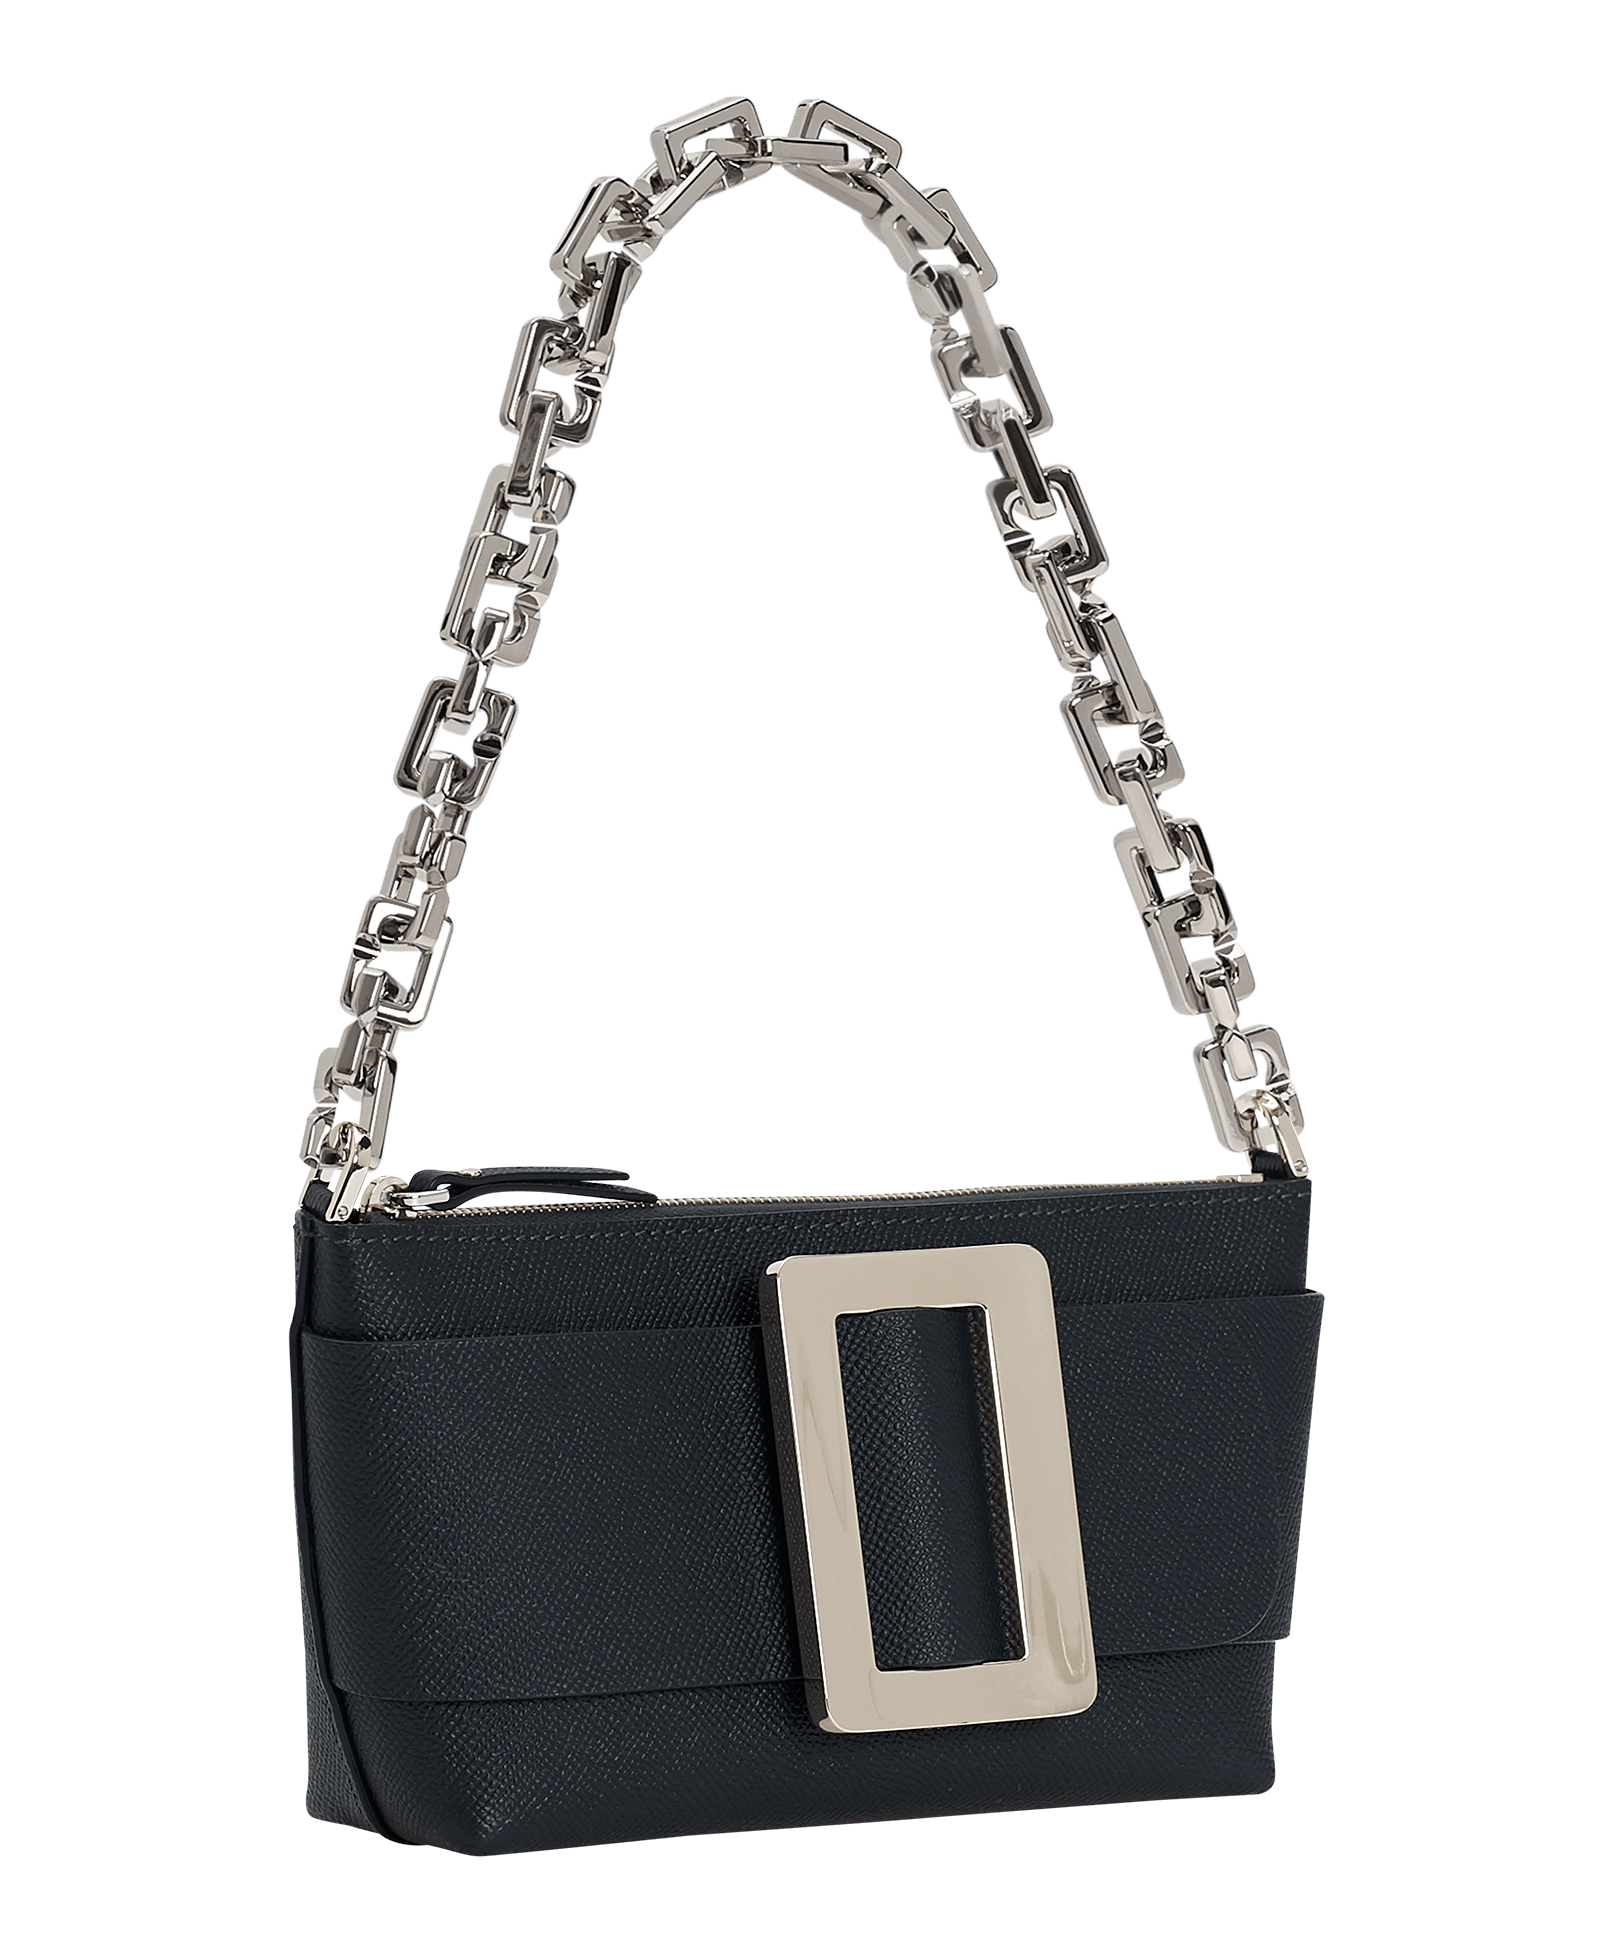 Small, blue shoulder bag with a large silver buckle on the front, Made with grained calfskin leather.